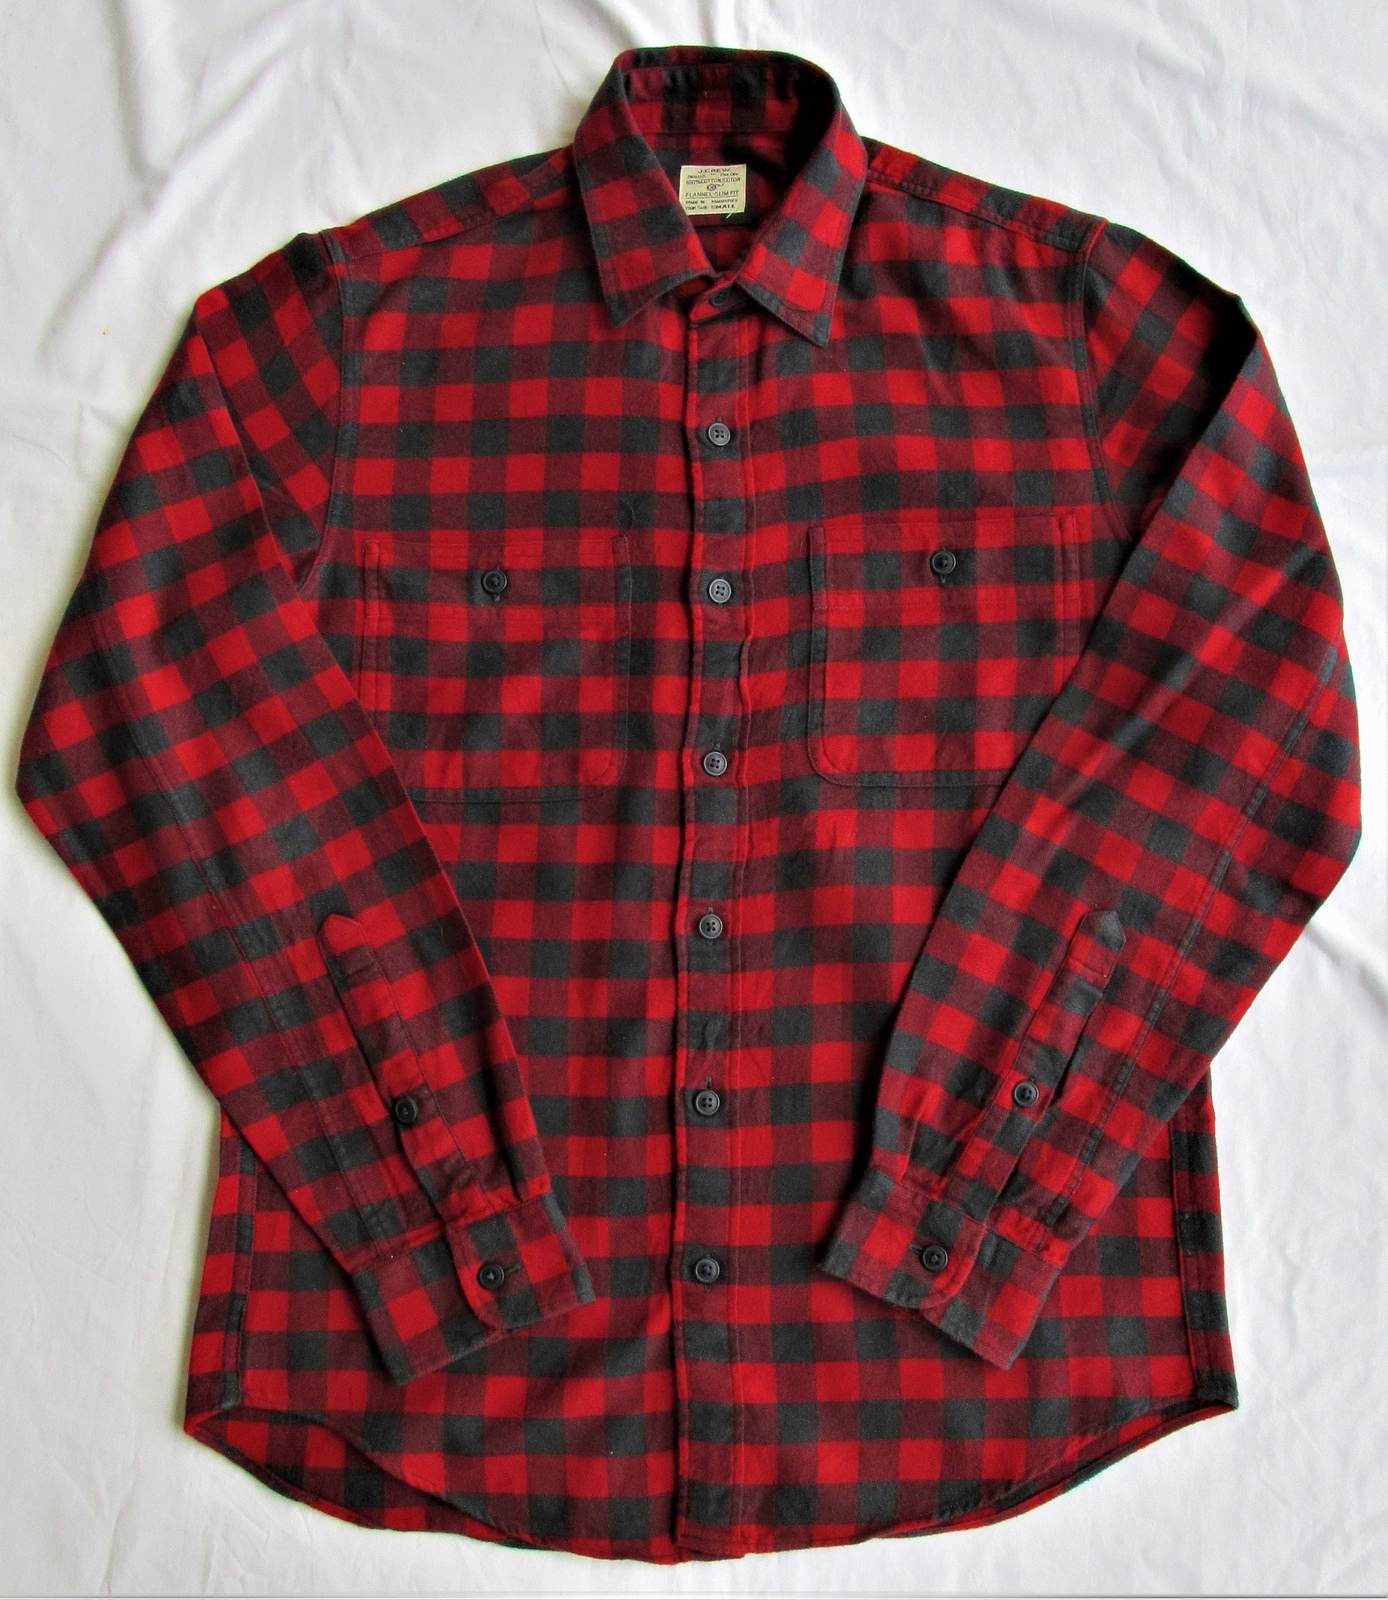 Primary image for J. Crew Men's (Slim Fit) Cotton Flannel Shirt Size Small